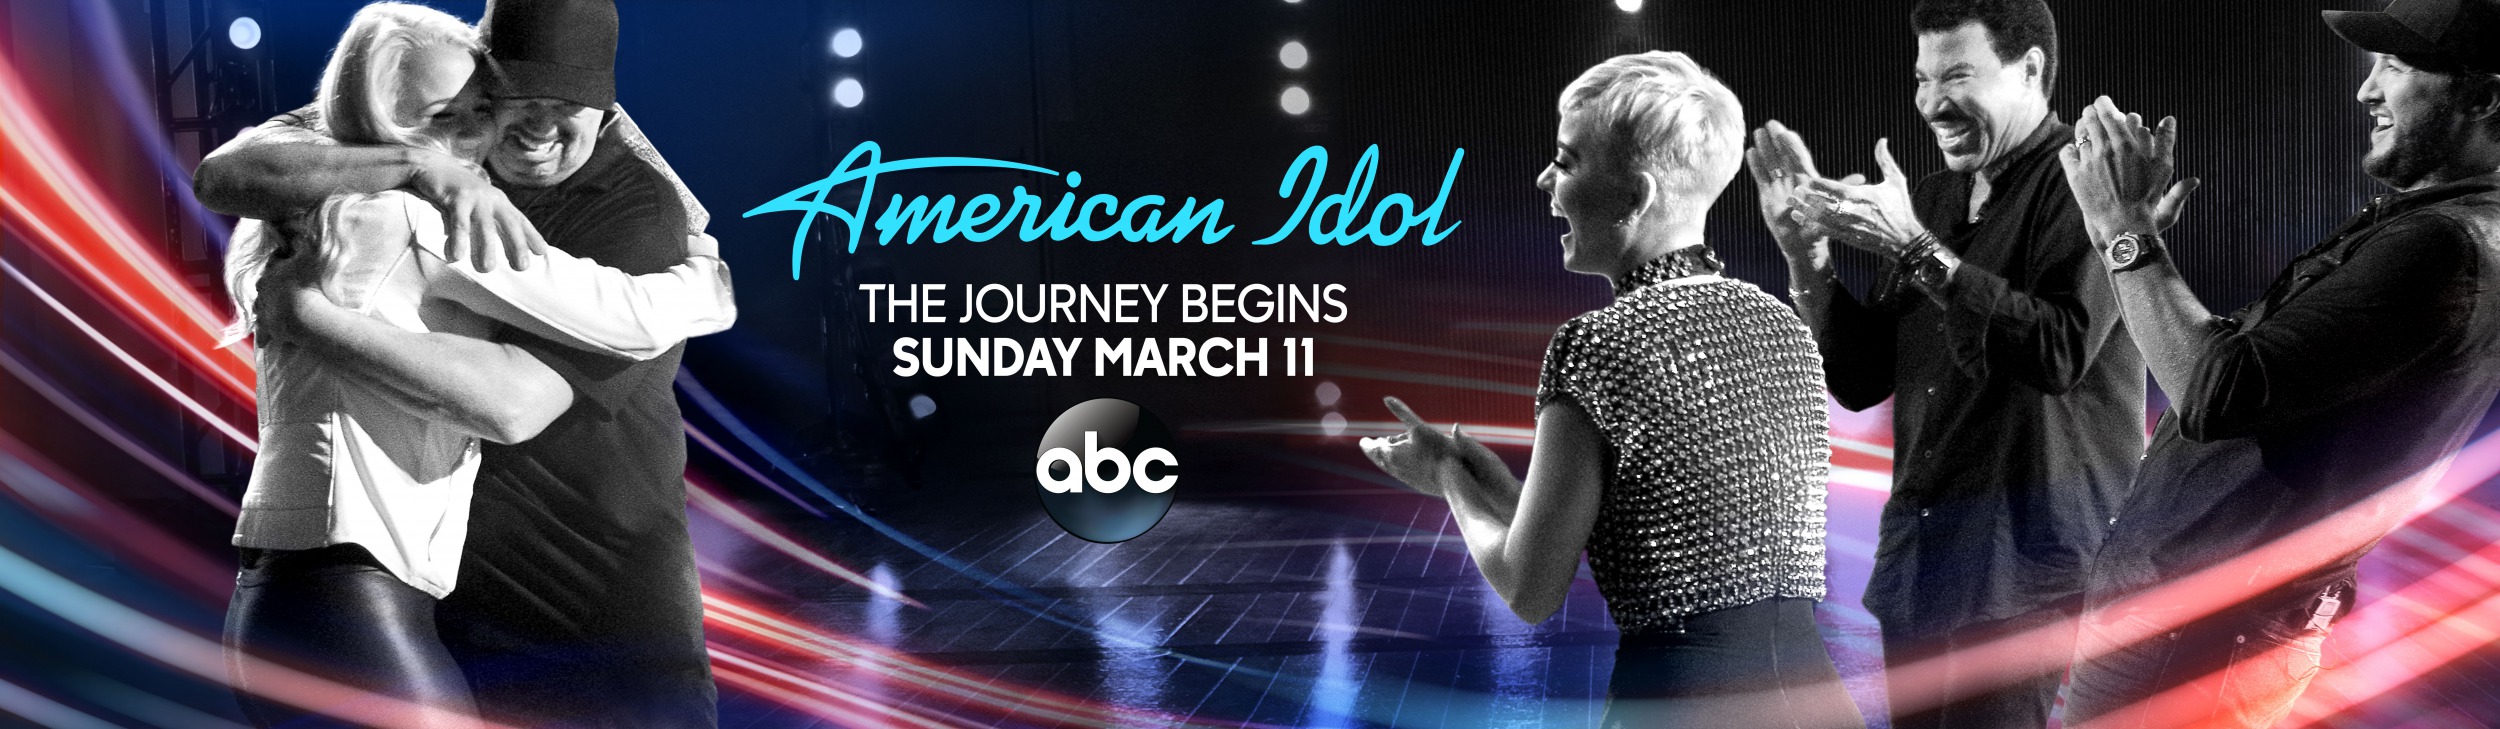 Mega Sized TV Poster Image for American Idol (#38 of 64)